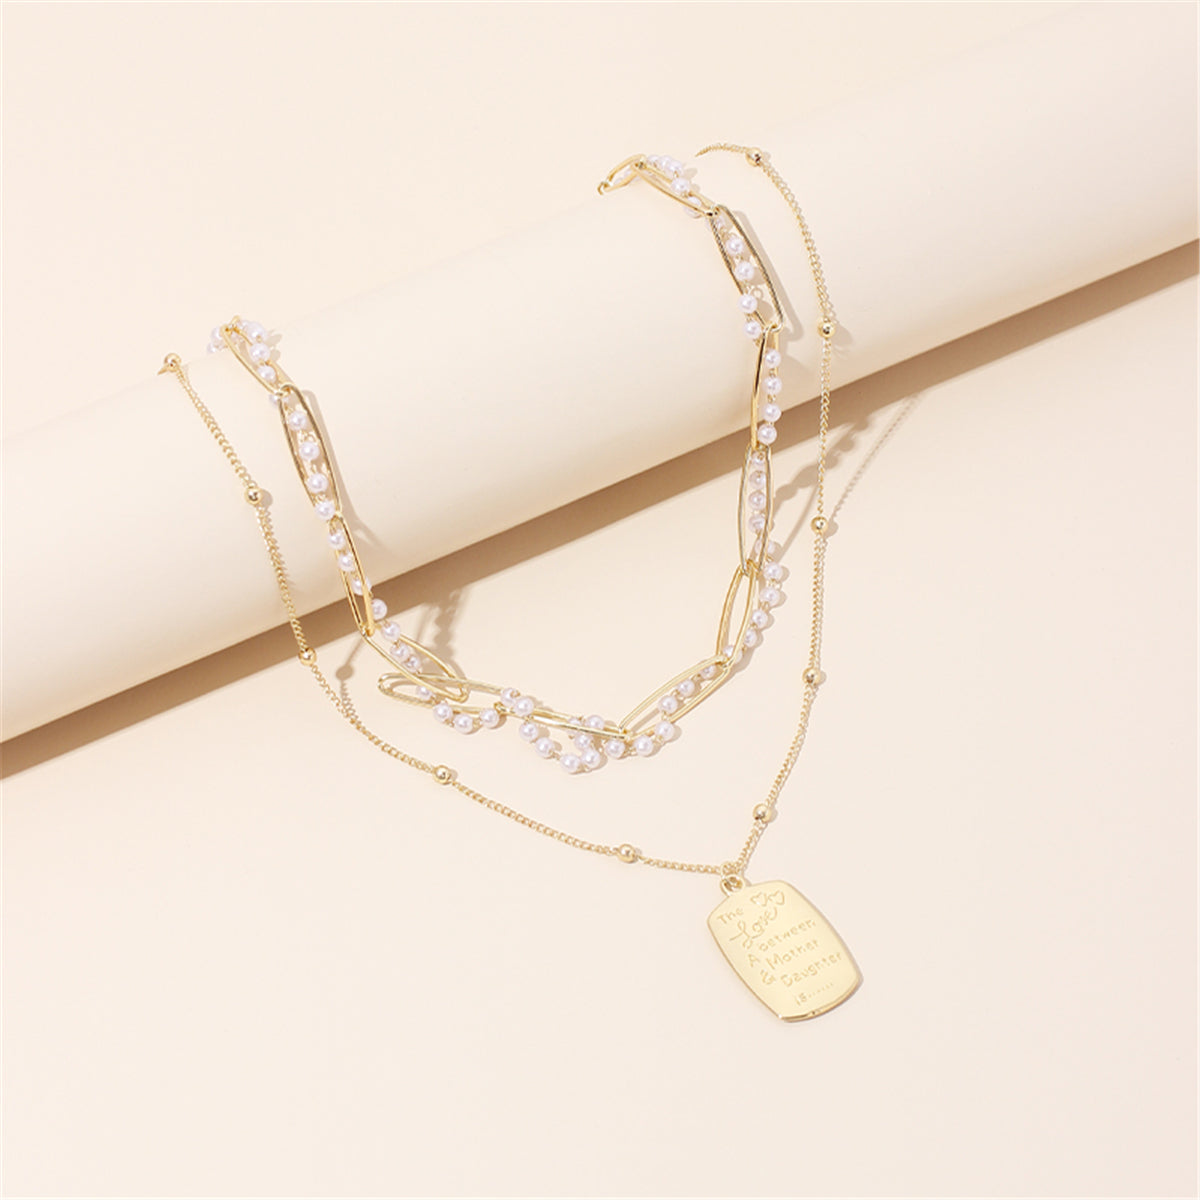 Pearl & 18K Gold-Plated 'Mother & Daughter' Pendant Necklace Set